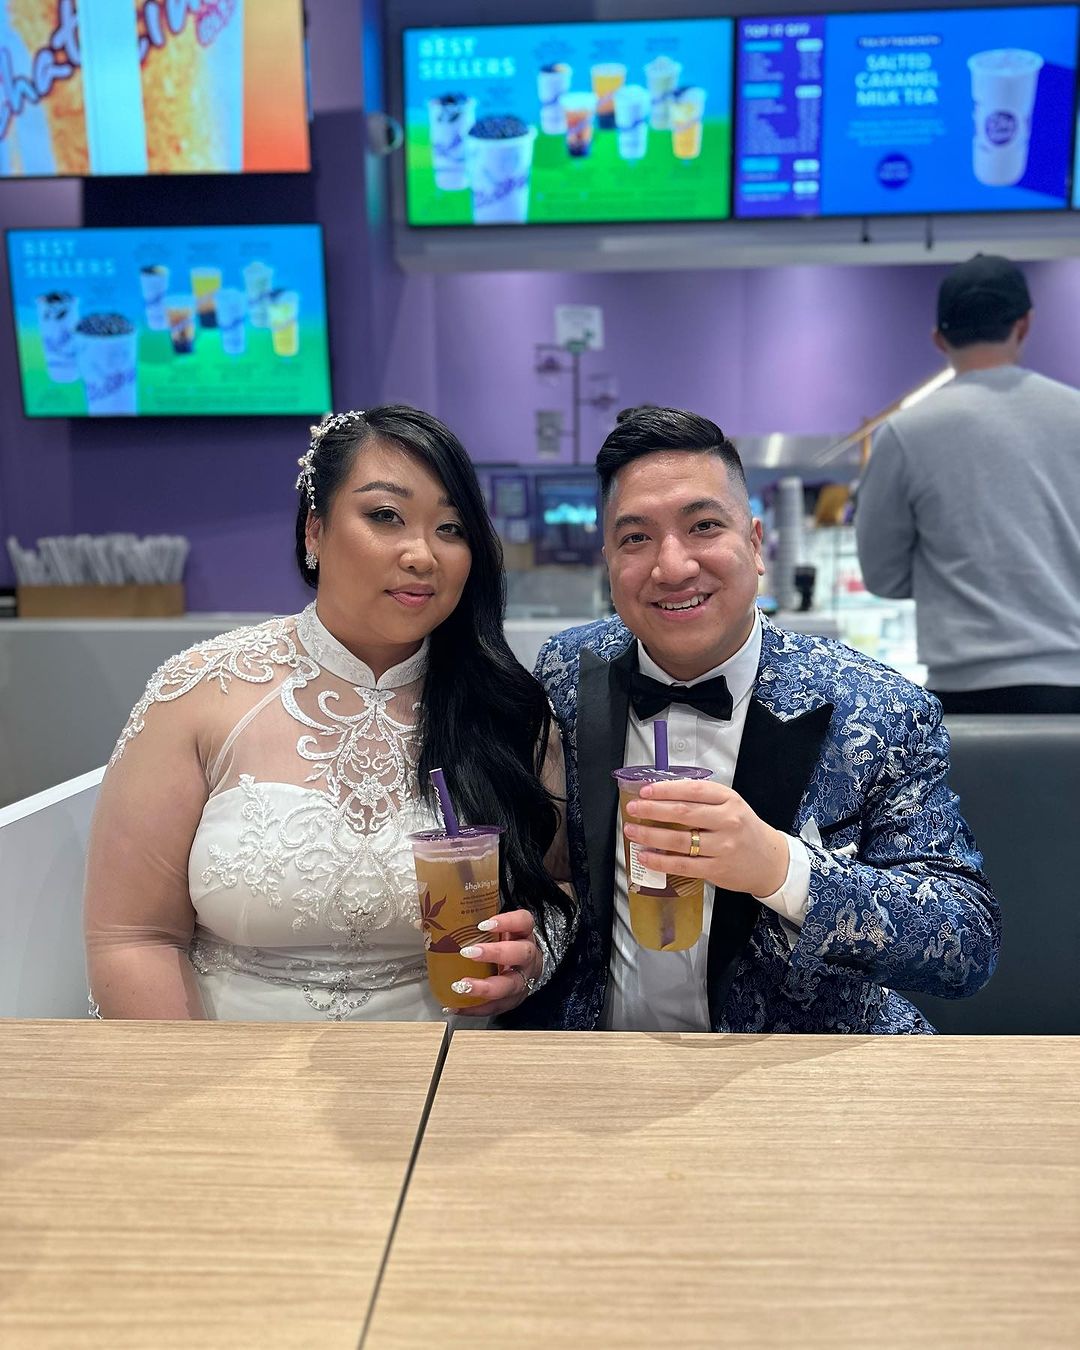 @victor_nguyen
“Chatime is me and my wife’s favourite bubble tea chain! Our first date ended up at a Chatime. 8 years later on our wedding night, we decided to end the celebrations by sharing some Chatime.  We can always rely on their consistency in their drinks and it was a full circle moment for us!”